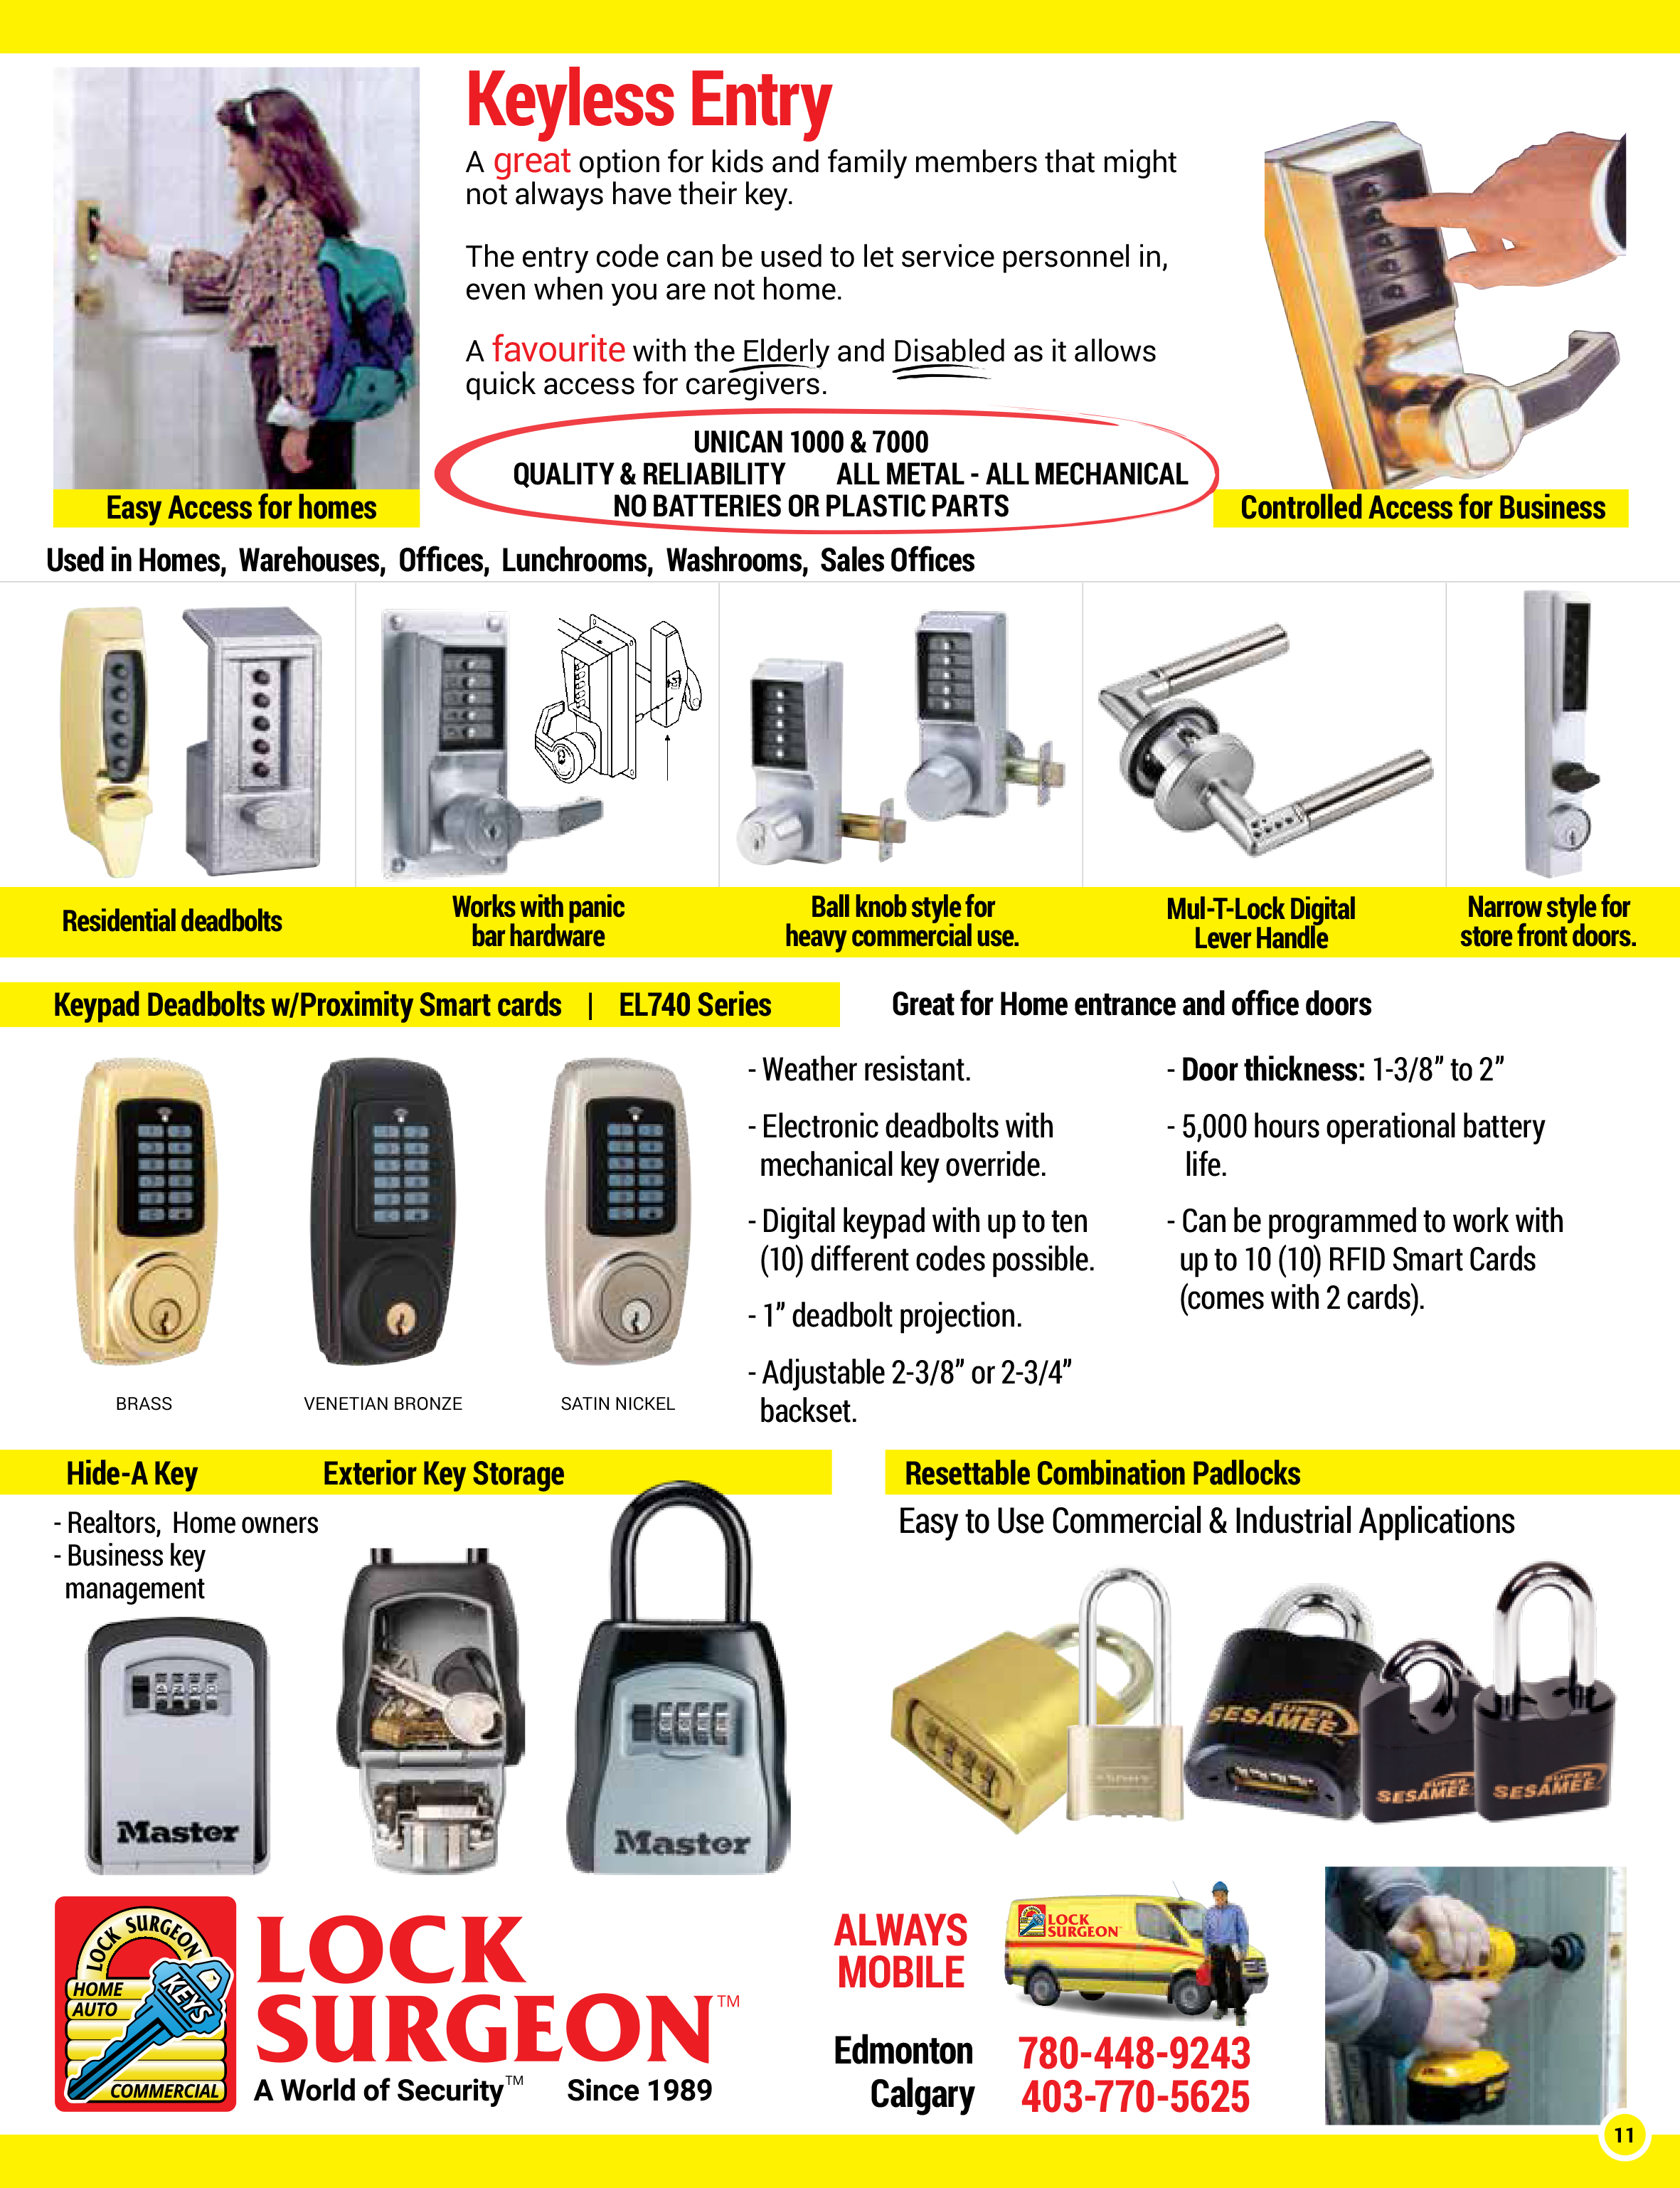 Keyless entry system for multiple home & commercial doors & Combination hide-a-lock for key storage.